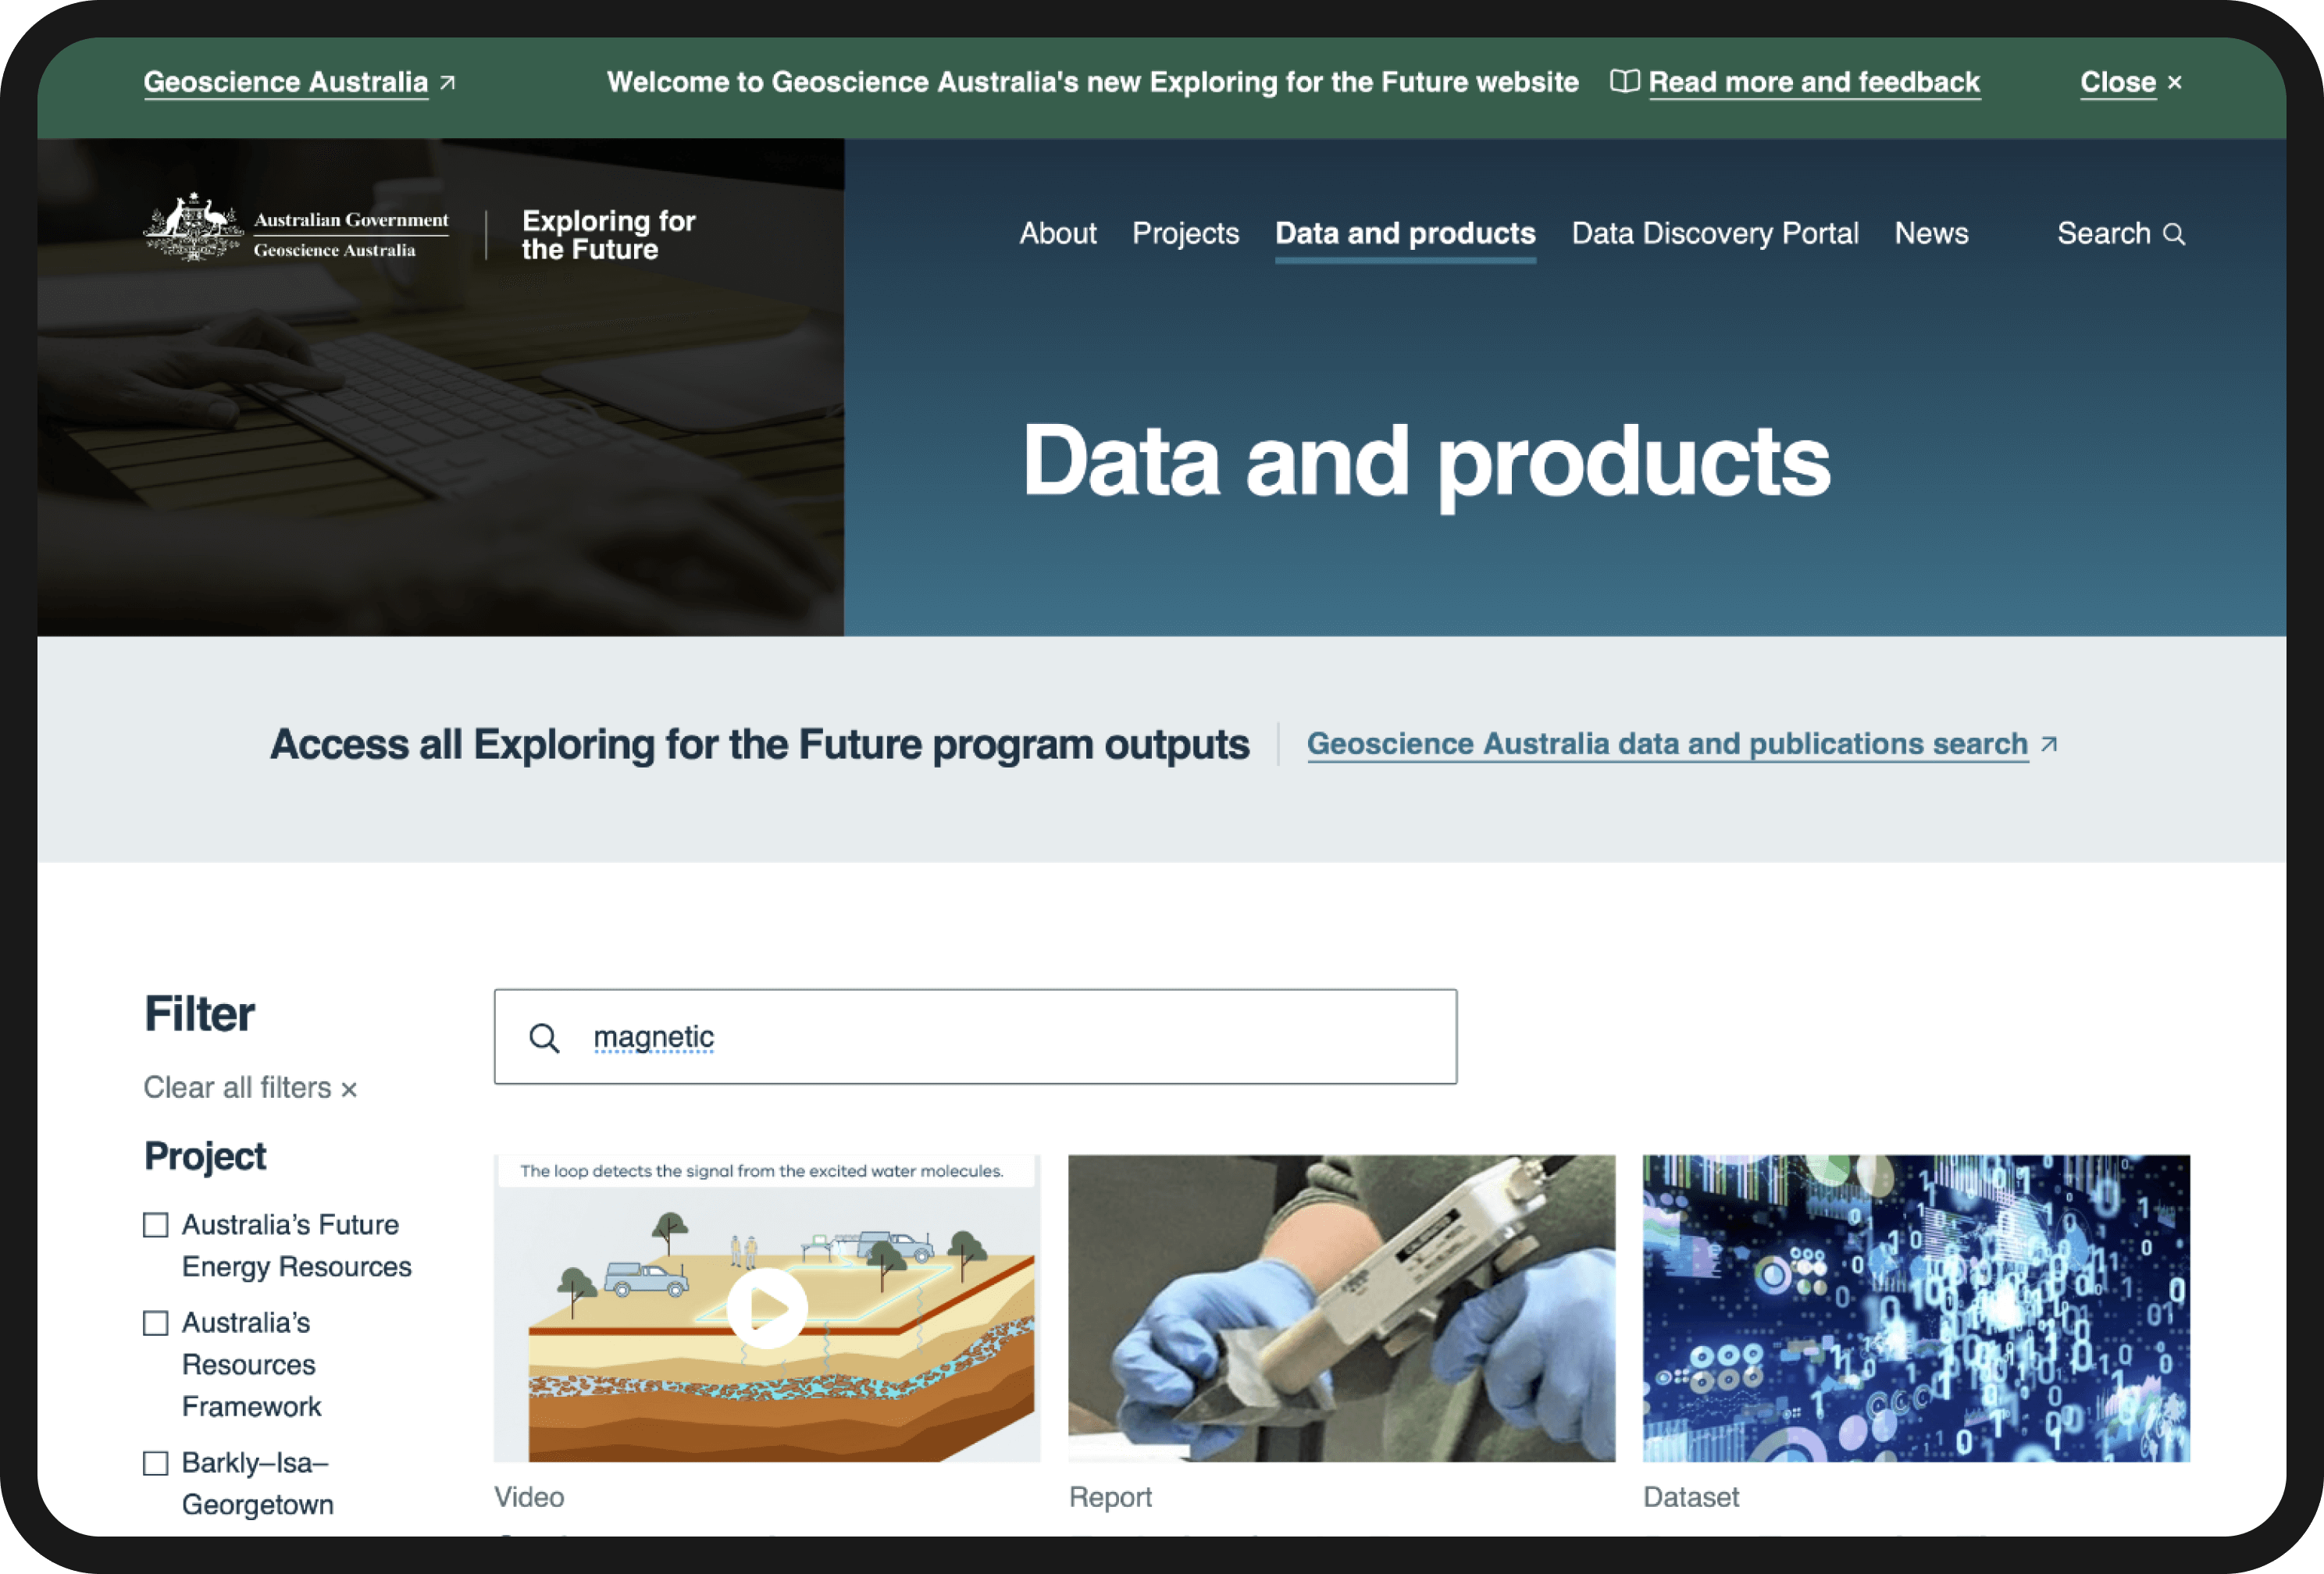 Image of Data and products page of Geoscience Australia website, showing search result for 